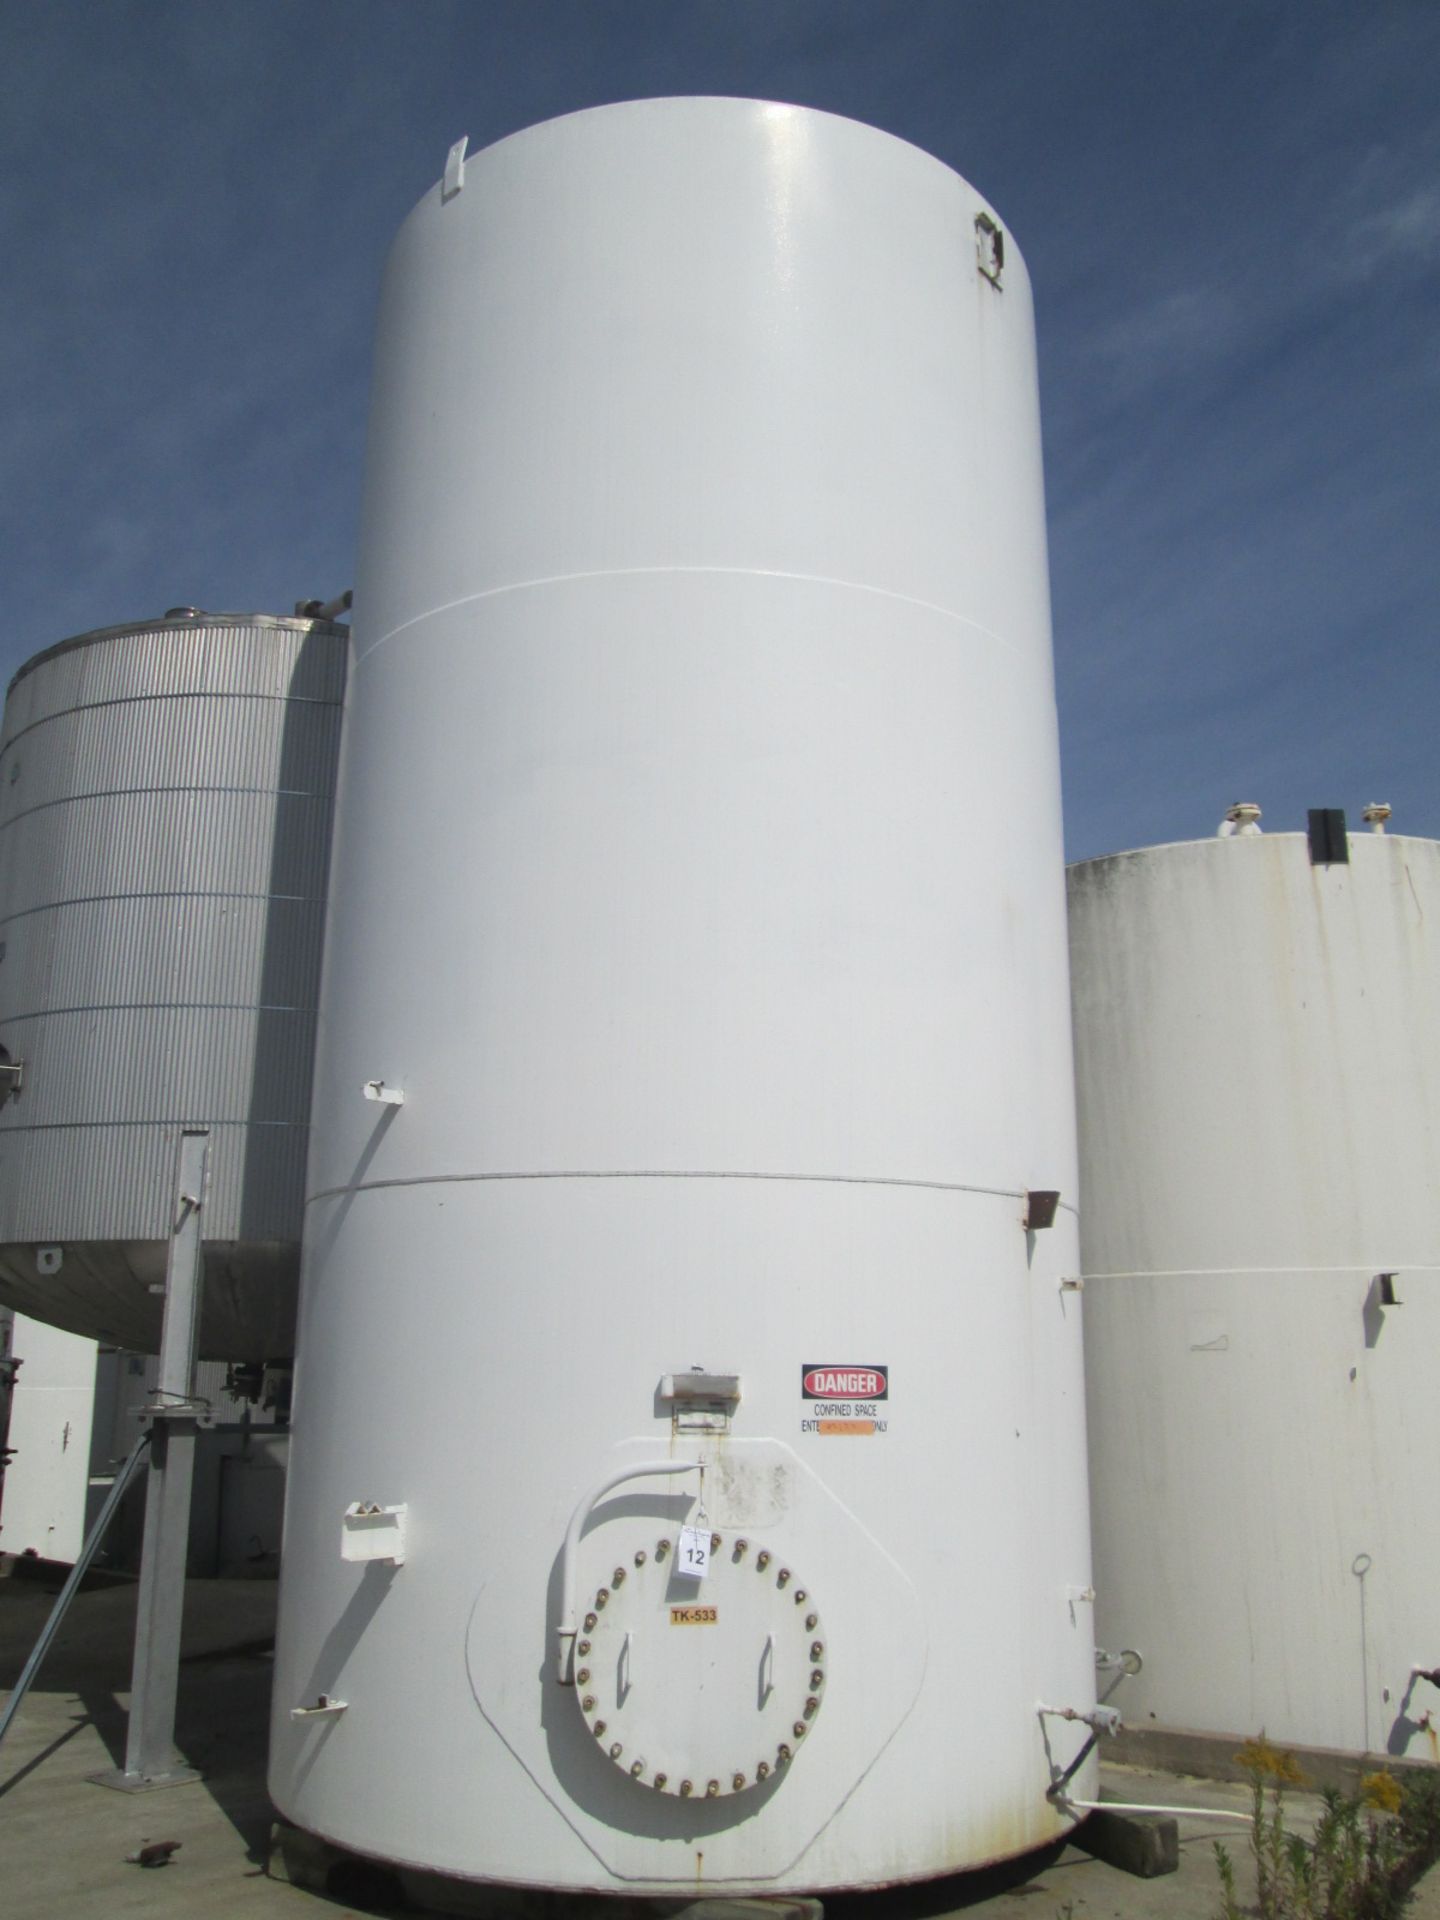 14500 gallon O'Conner storage tank, carbon steel construction, 10'6" diameter x 23' straight side, - Image 6 of 10